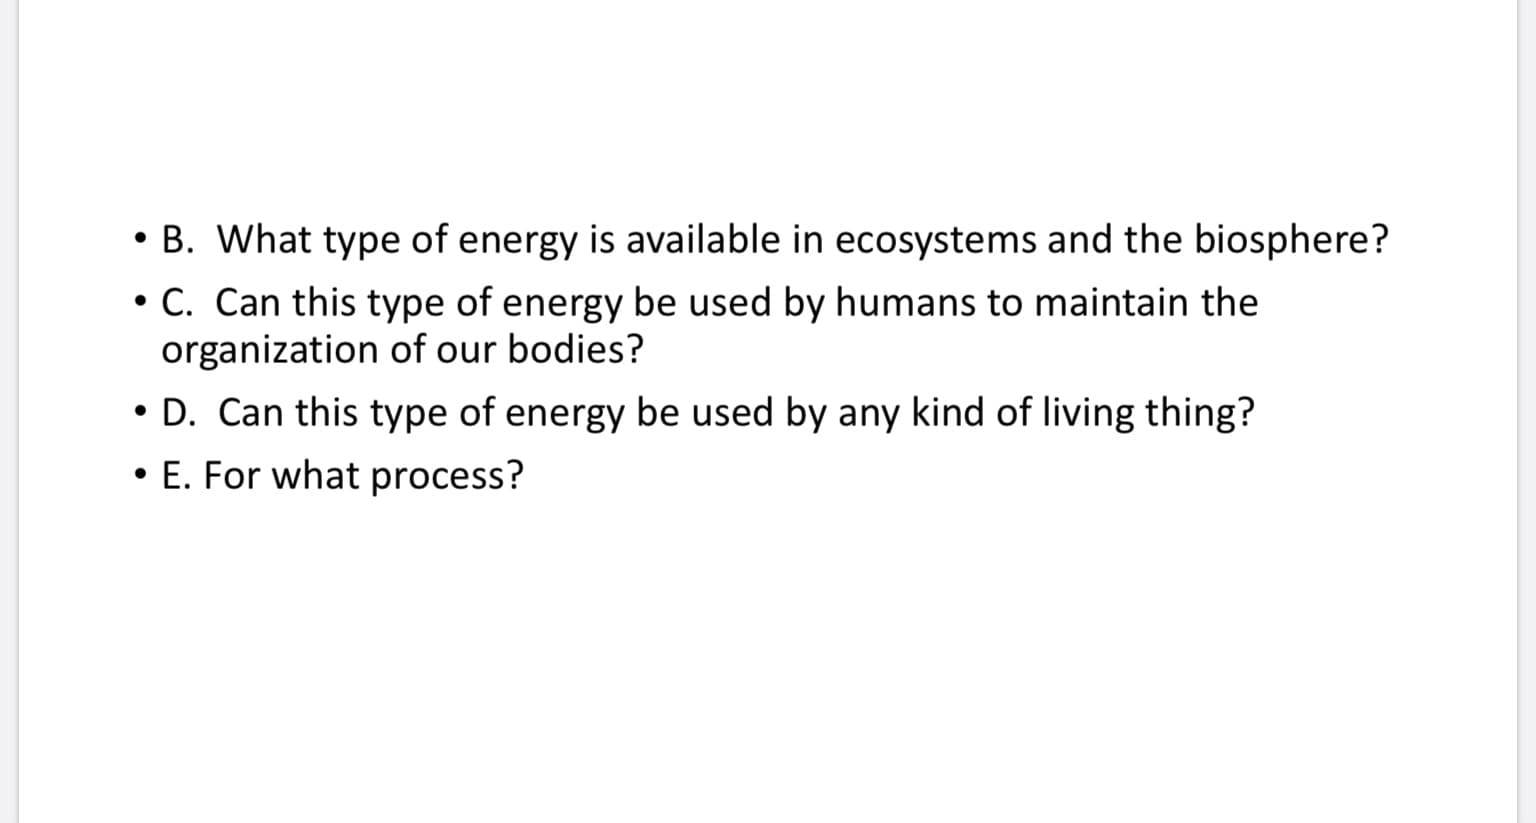 • B. What type of energy is available in ecosystems and the biosphere?
• C. Can this type of energy be used by humans to maintain the
organization of our bodies?
• D. Can this type of energy be used by any kind of living thing?
• E. For what process?
